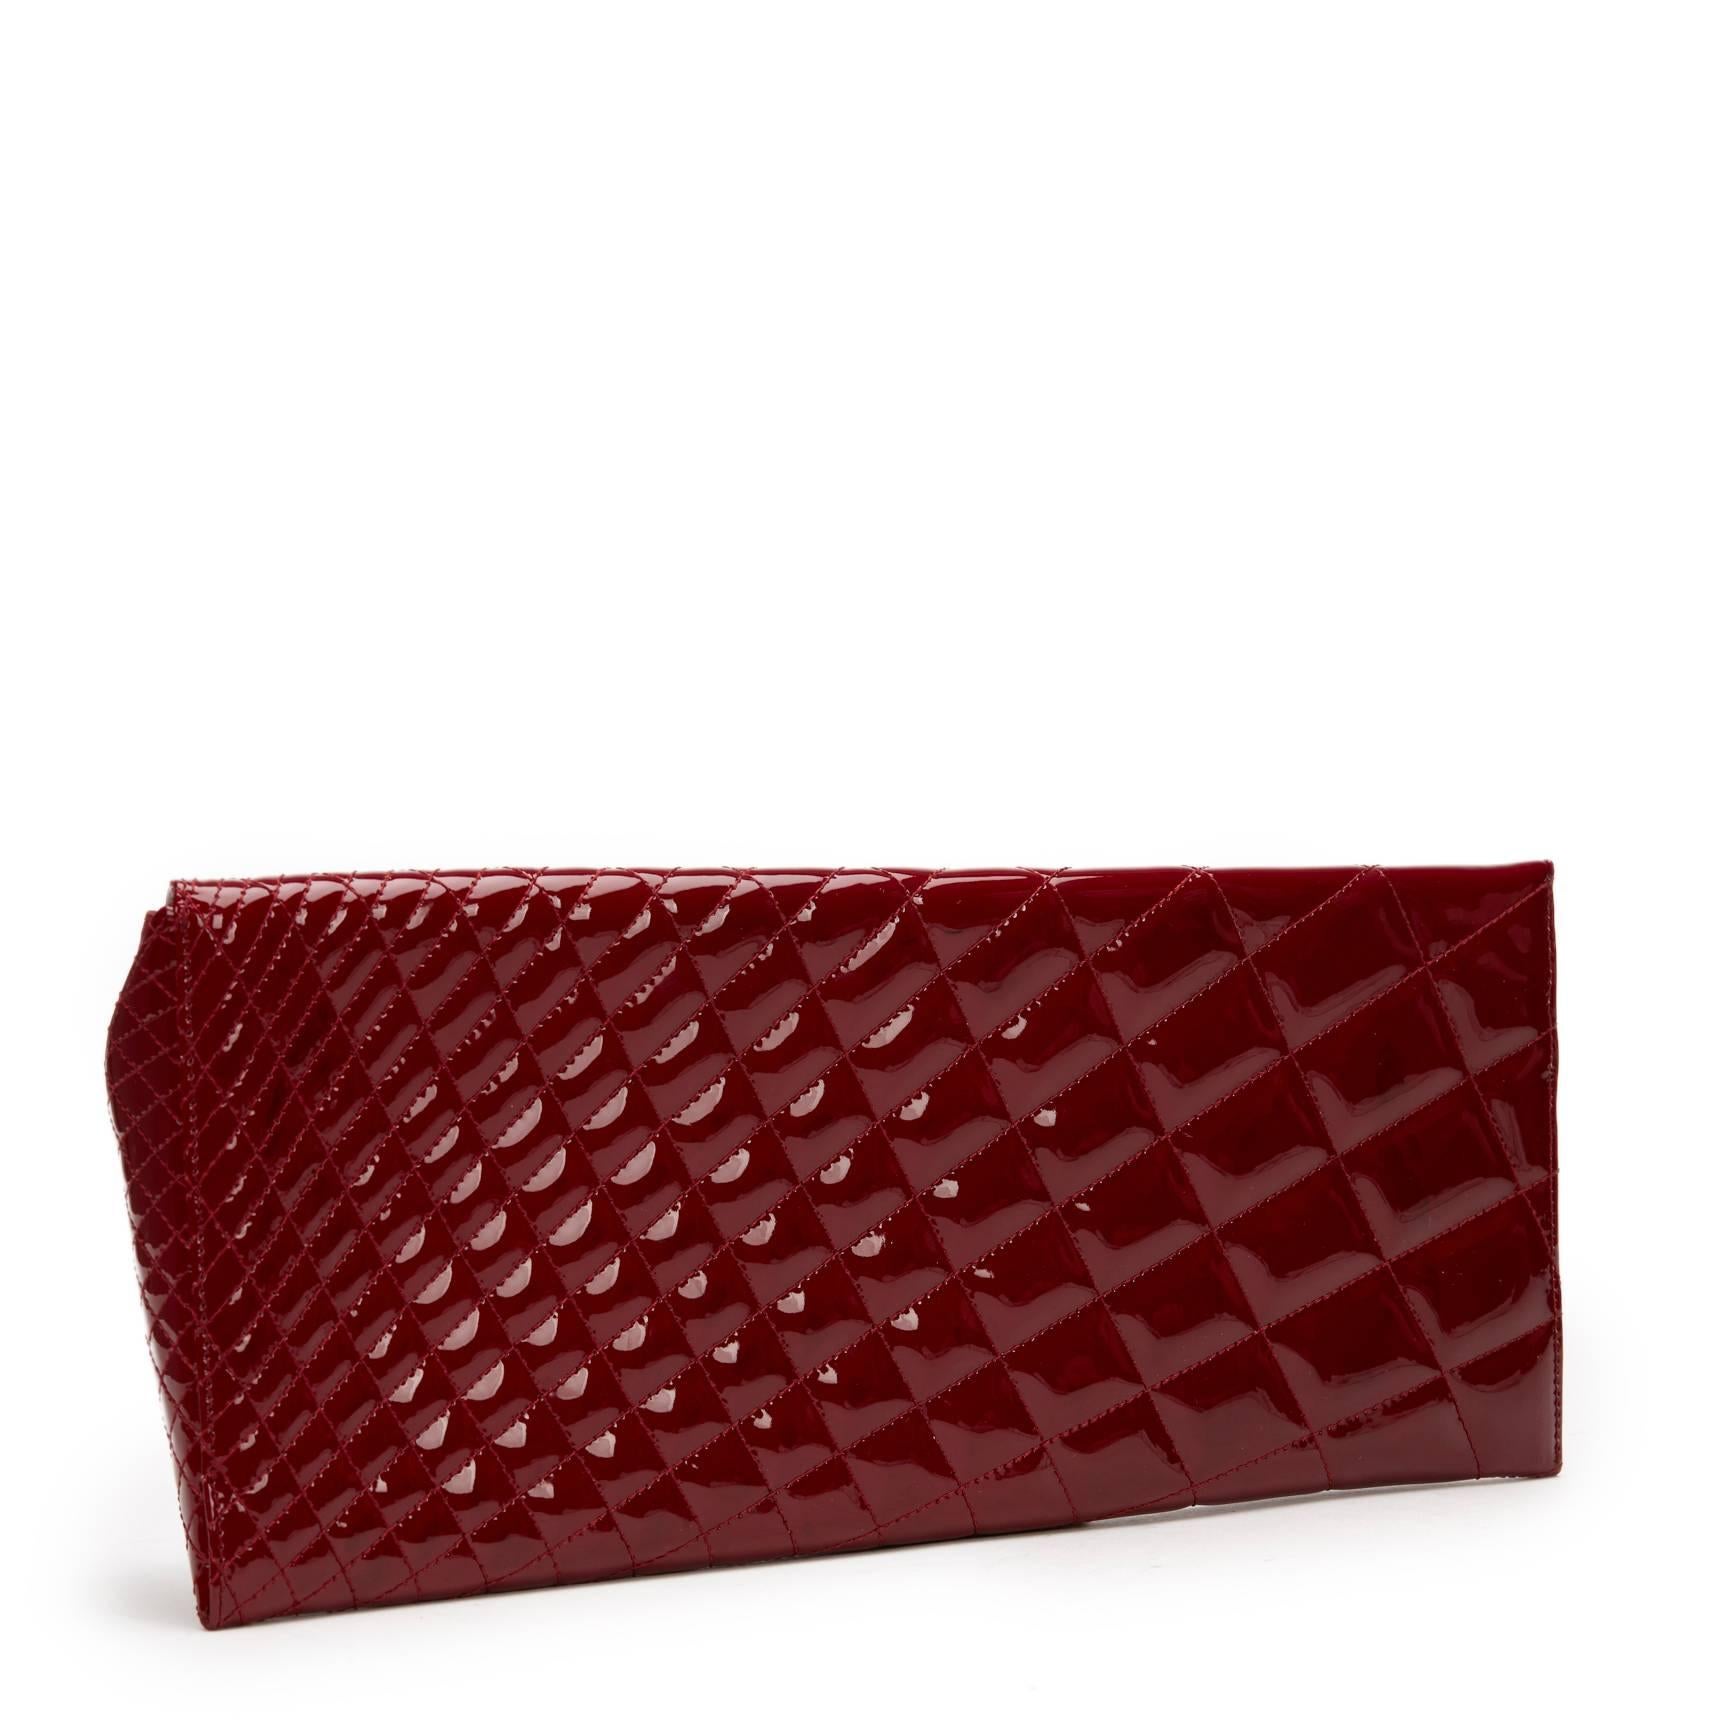 2000s Chanel Burgundy Quilted Patent Leather Geometric Clutch 3